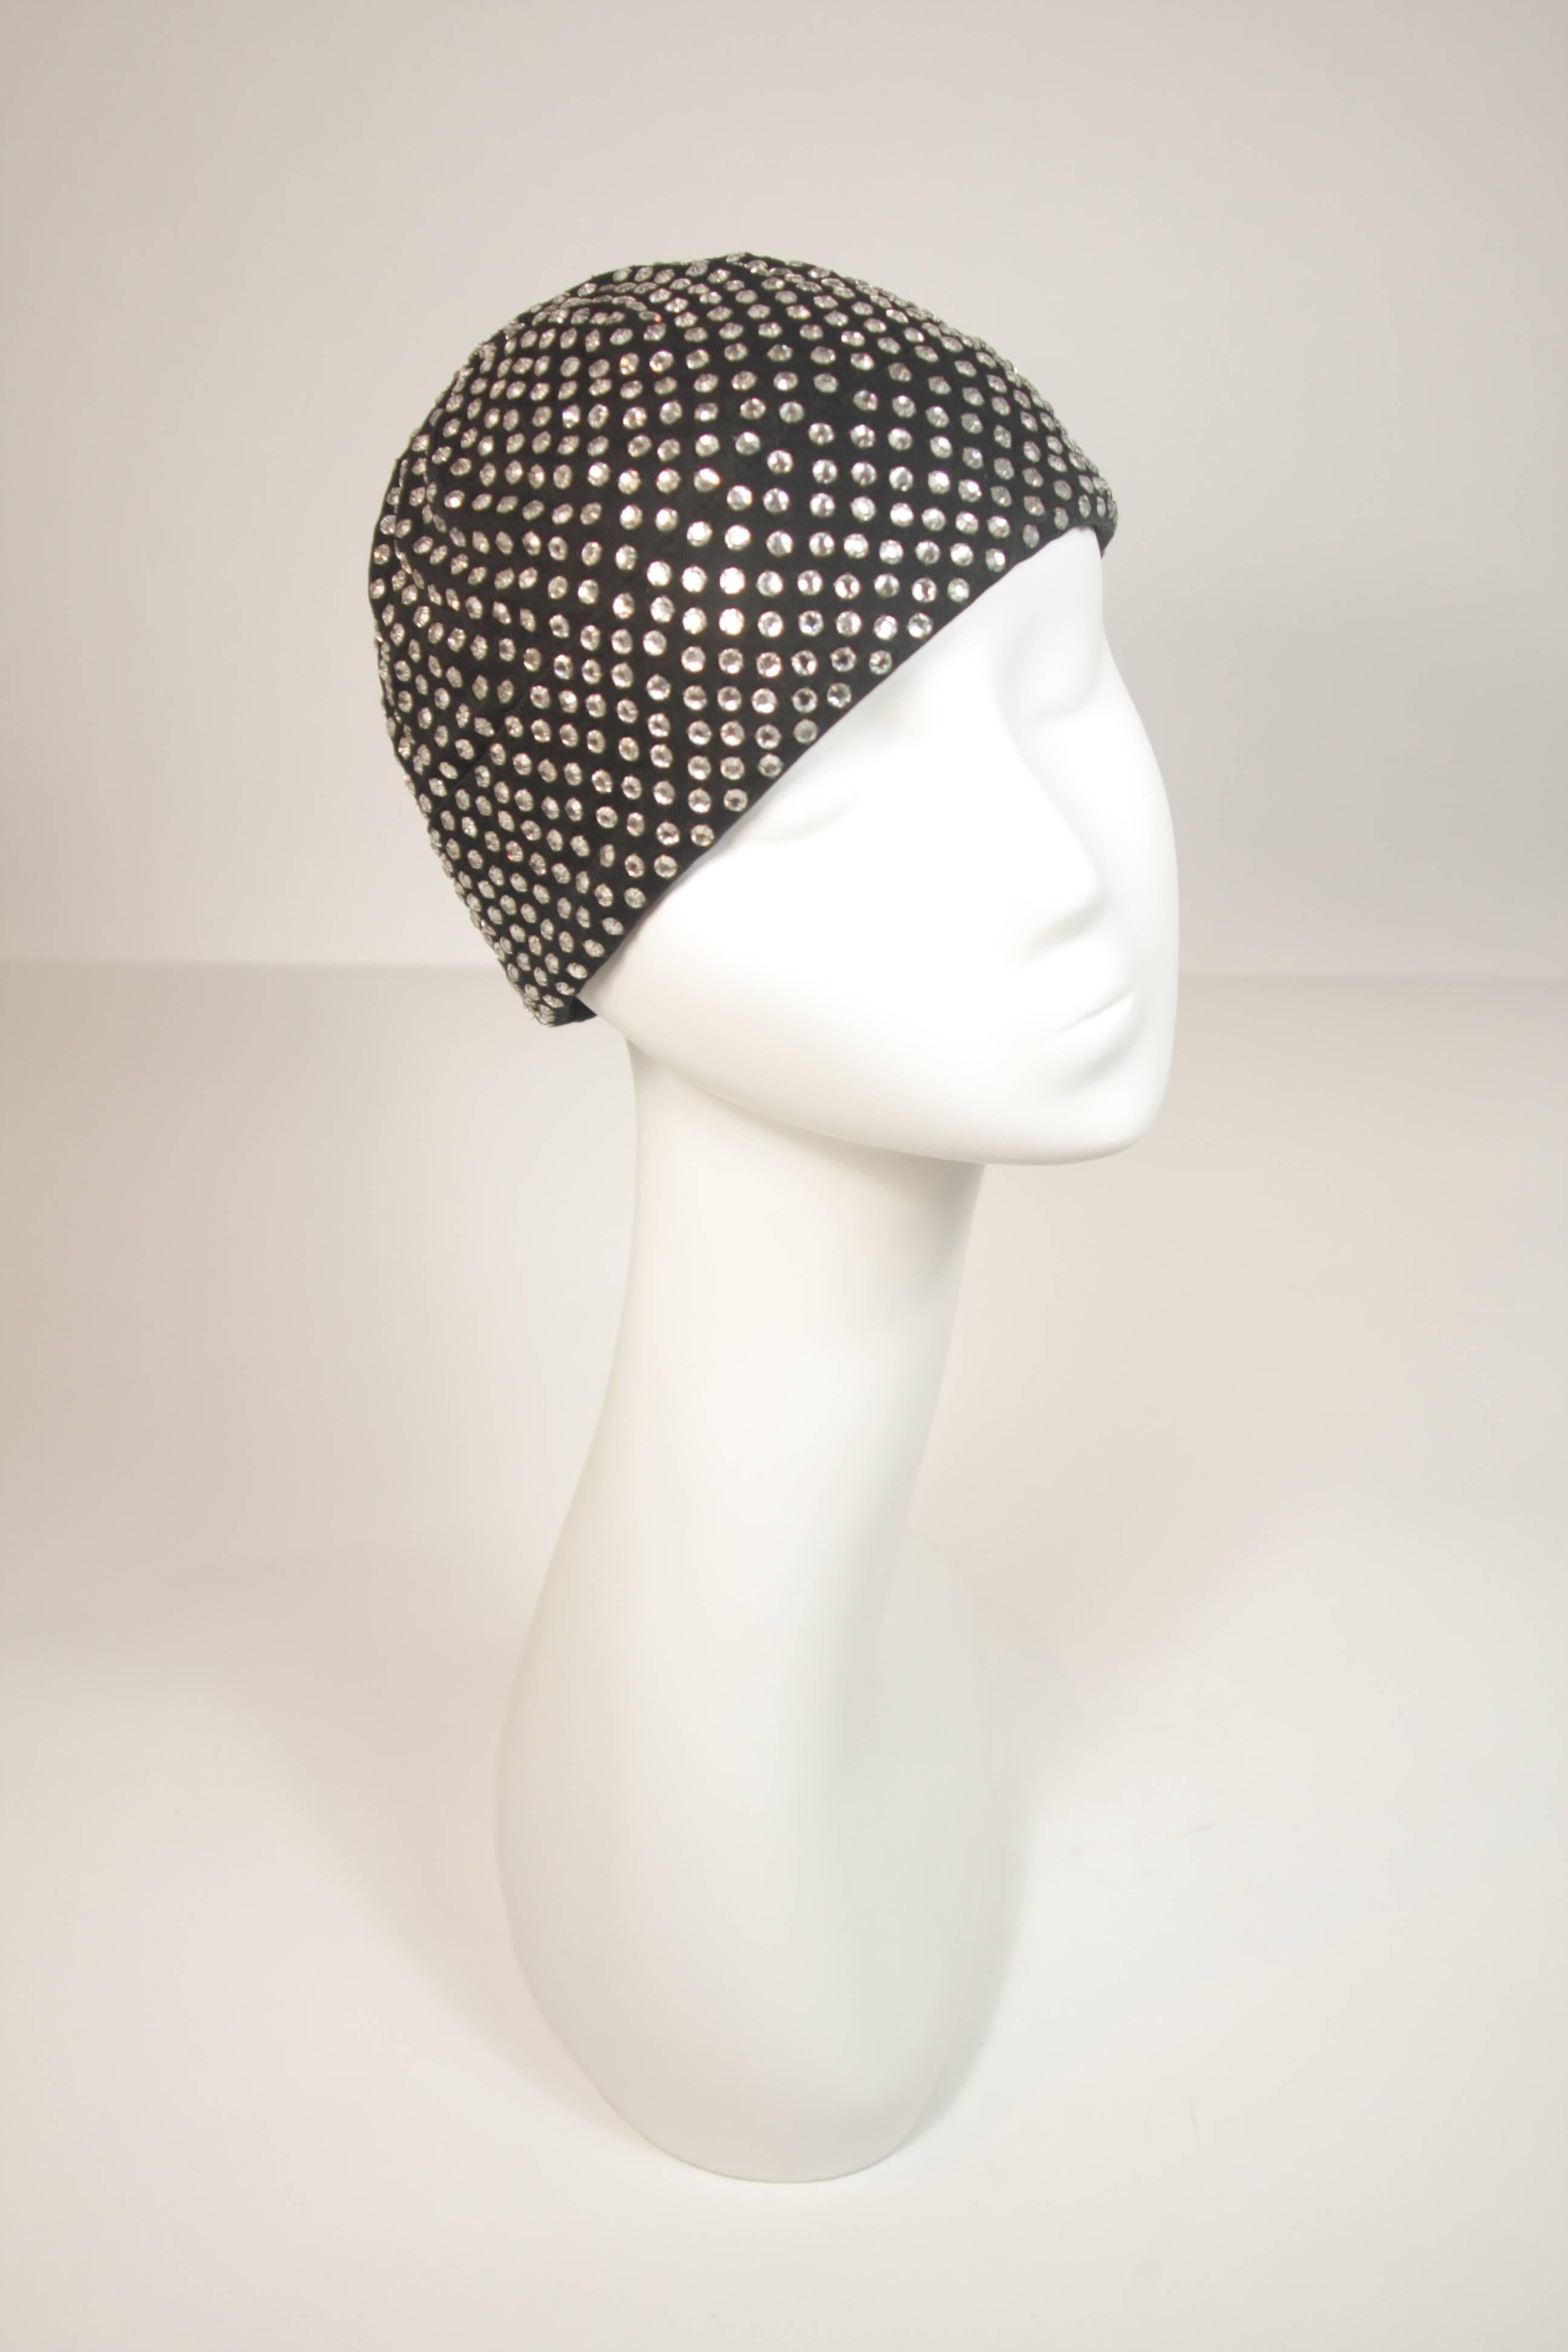 This Frank Olive hat is composed of a black jersey and features rhinestones throughout. In excellent condition.

  **Please cross-reference measurements for personal accuracy. 

Measurements (Approximately)  
Circumference: 24.25